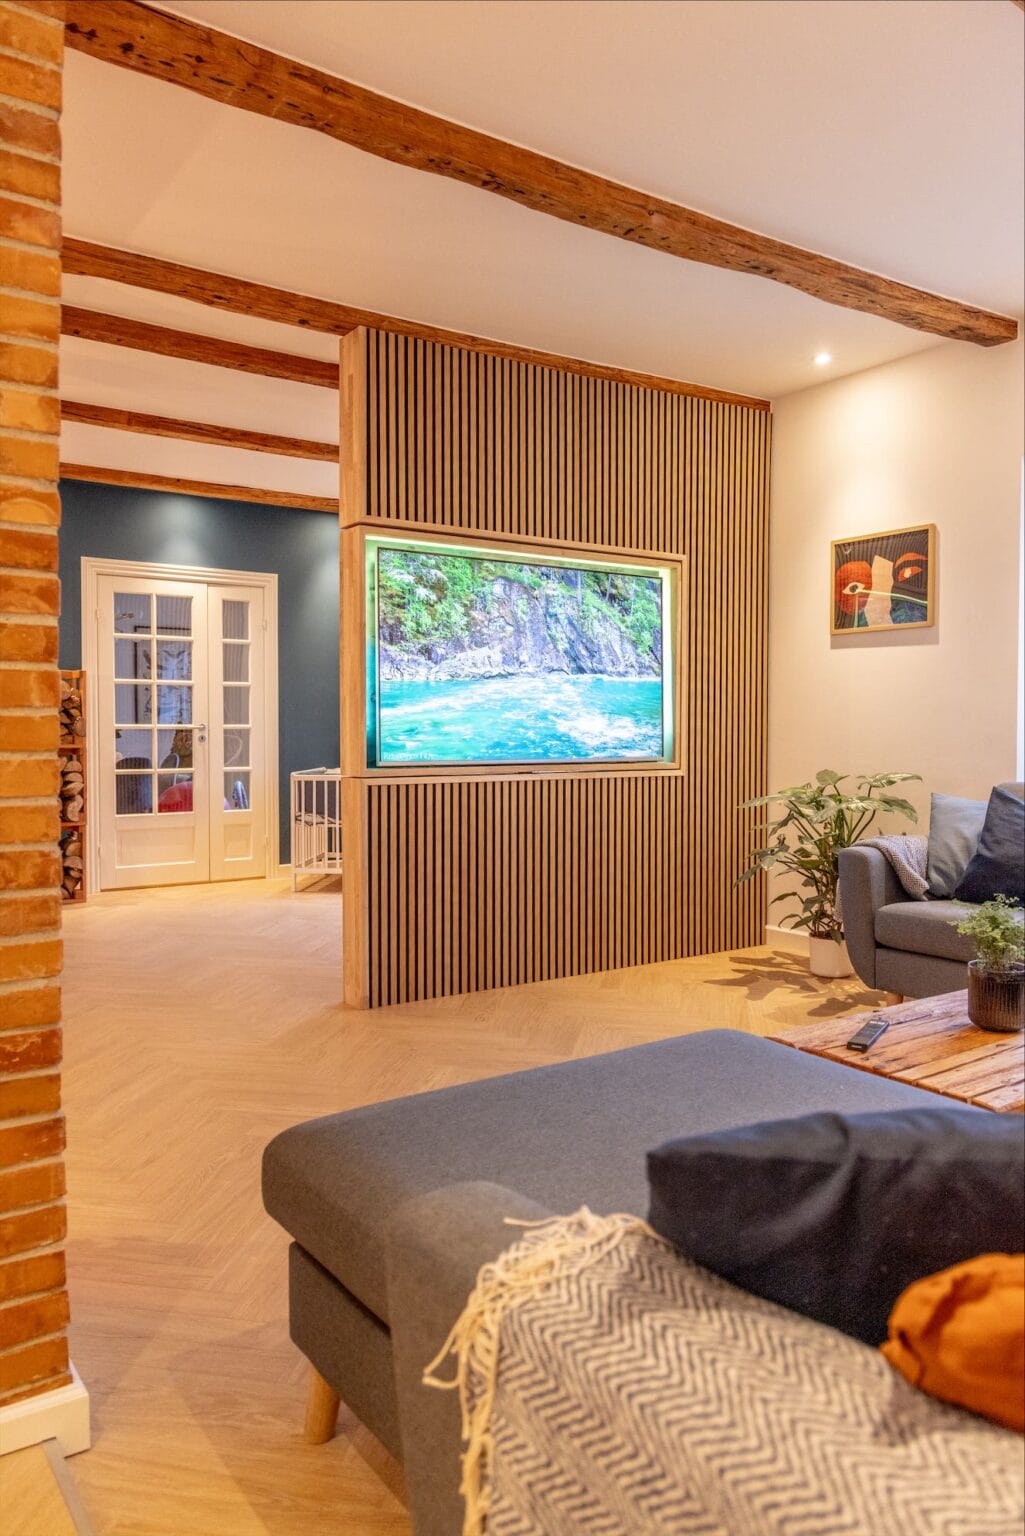 Cozy living room with modern decor and large screen TV